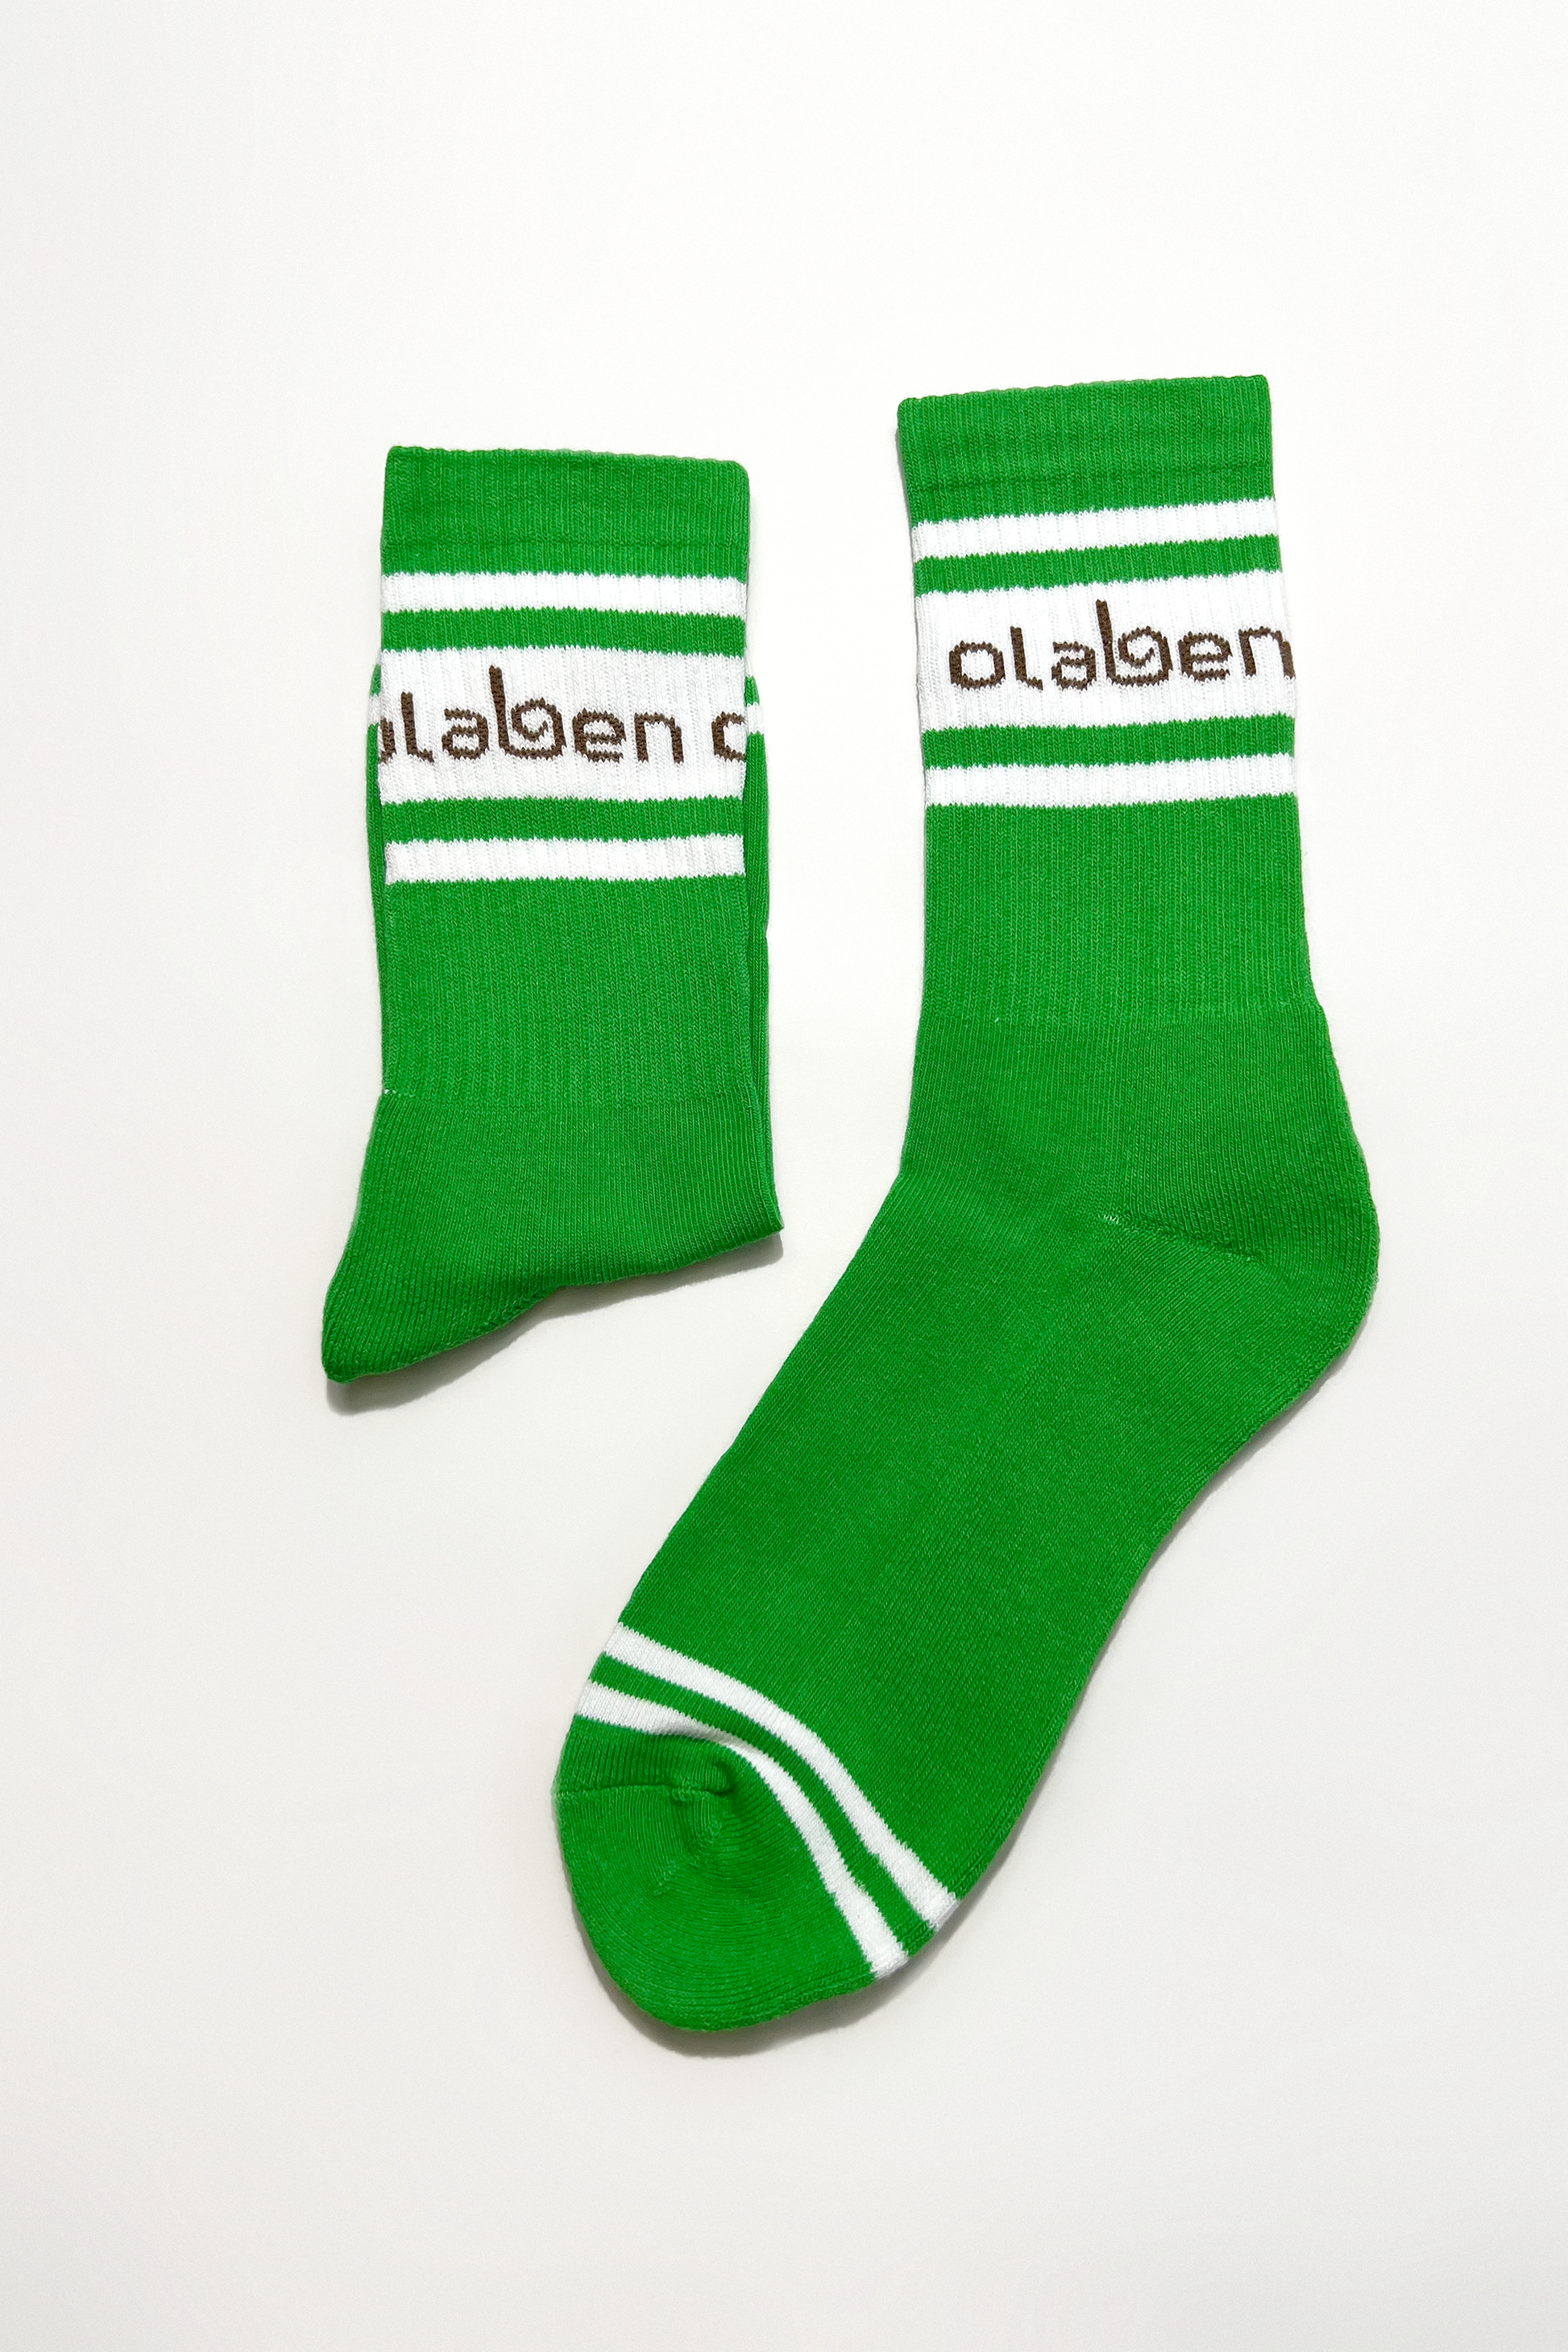 Pair of green socks with fern pattern, size 1-5, in a cozy quarter length.